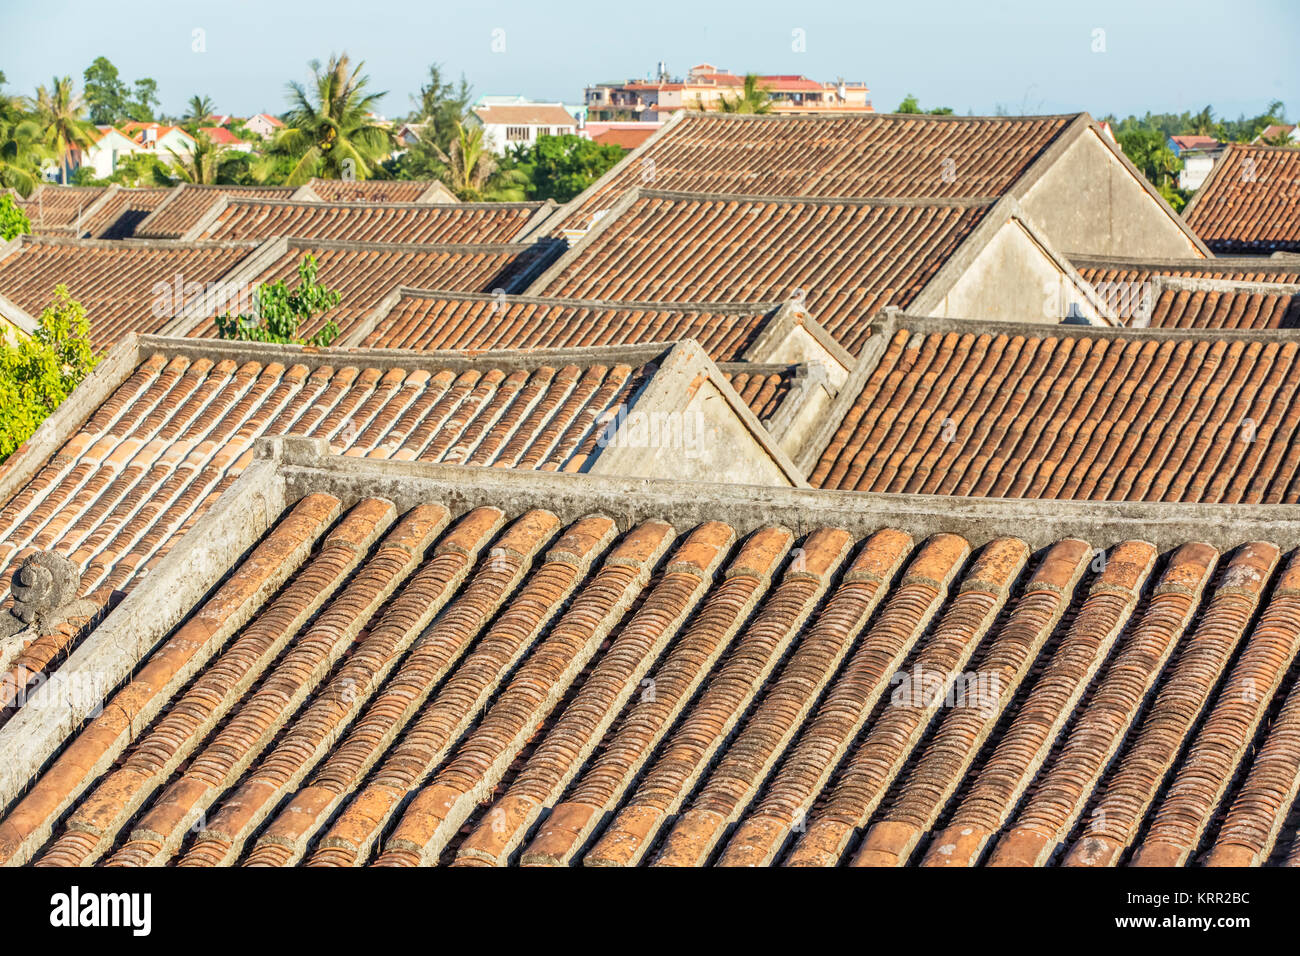 Royalty high quality free stock image of Hoi An, Vietnam. Stock Photo